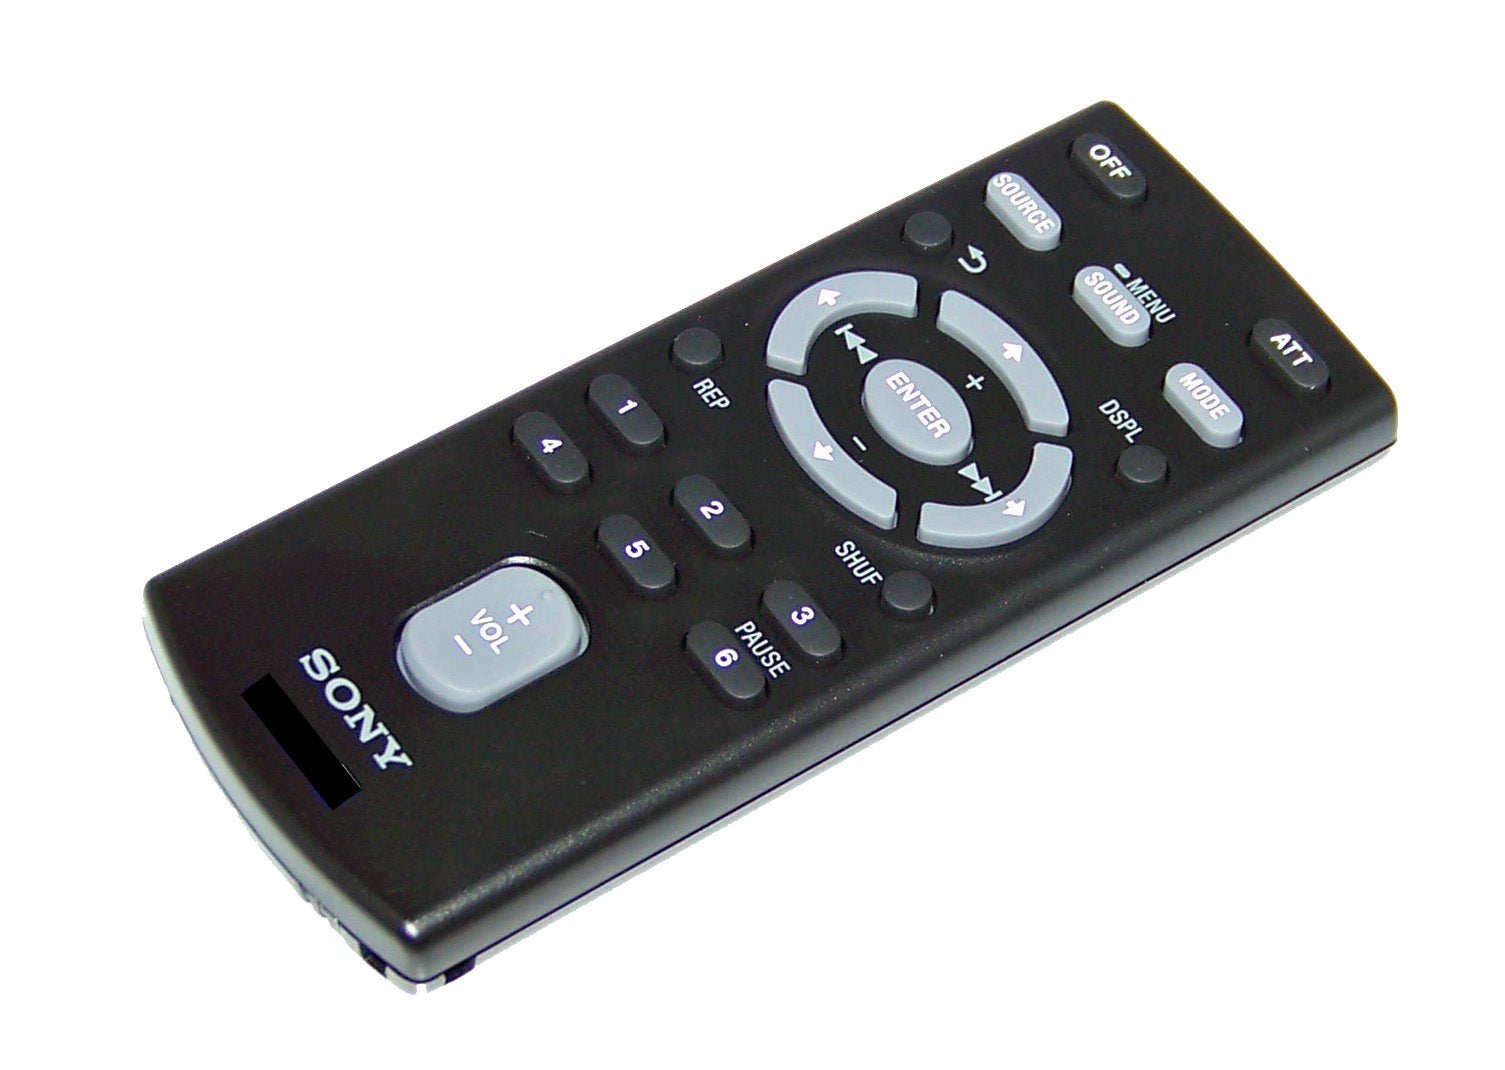 OEM Sony Remote Control Shipped With RSX-GS9, RSXGS9